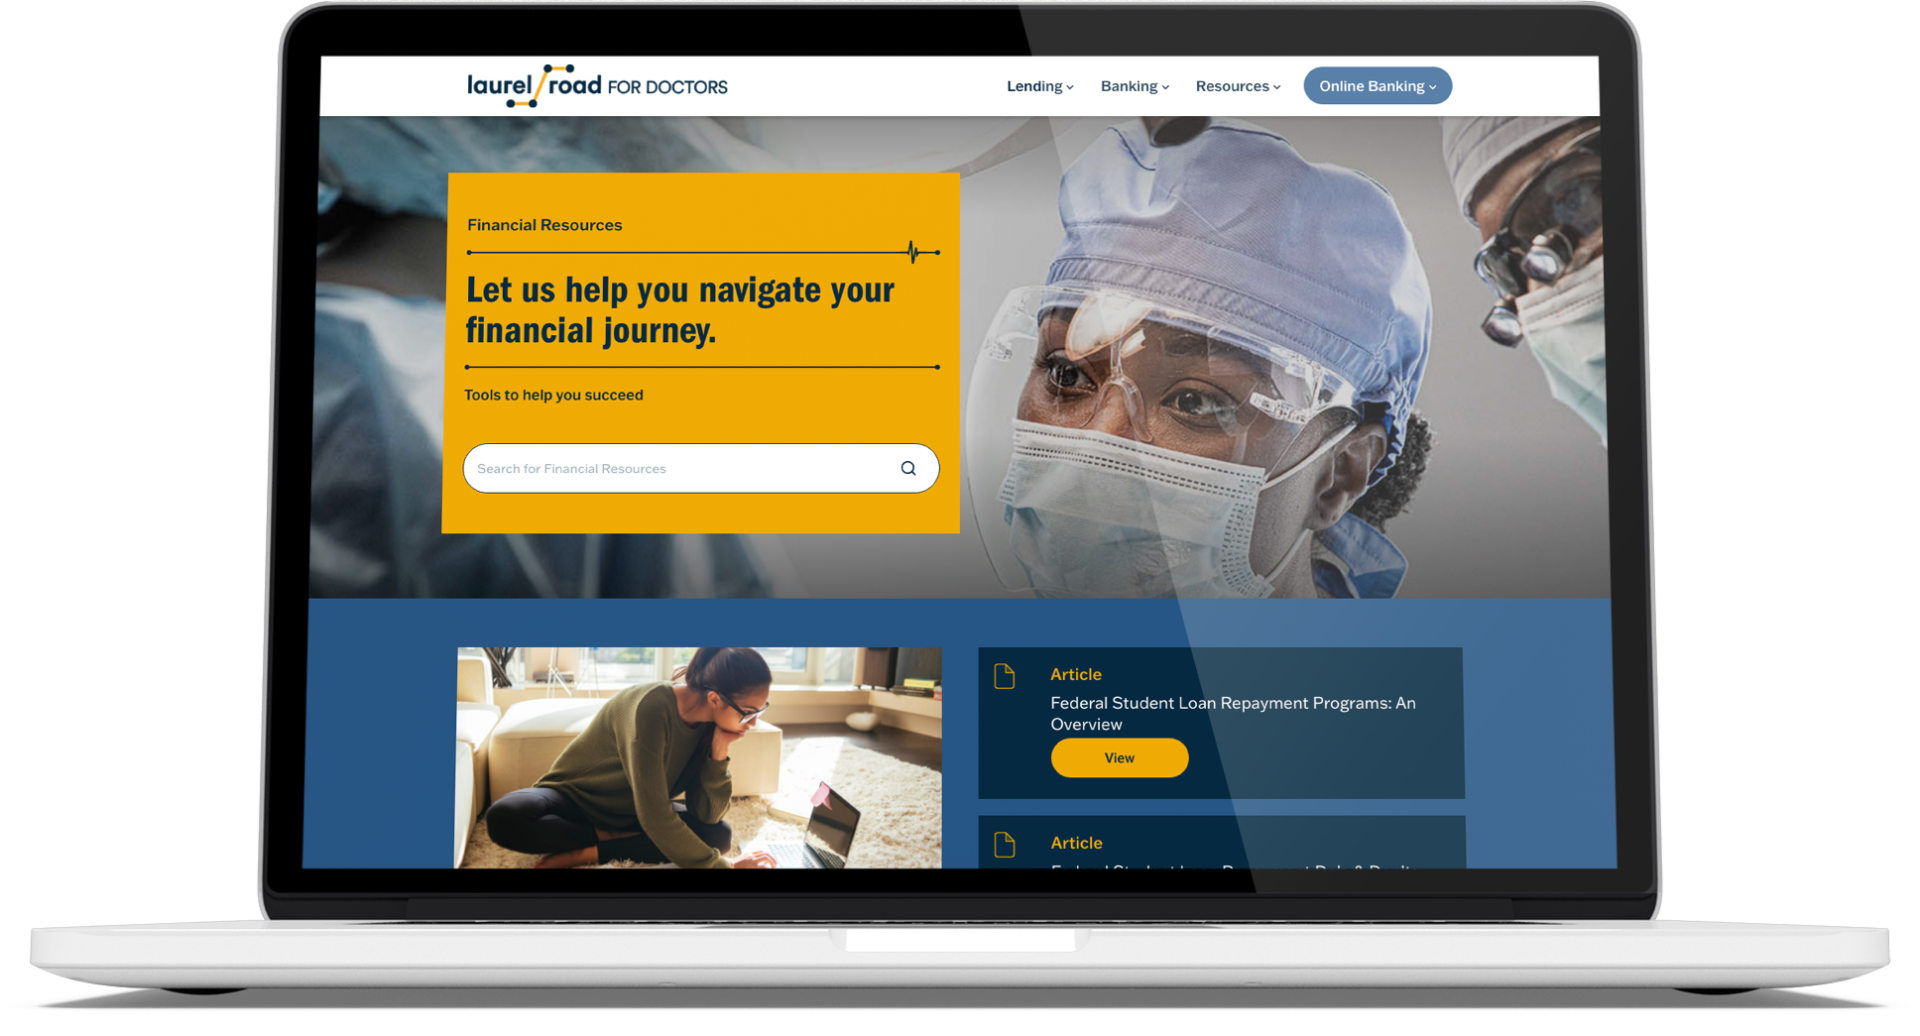 laptop displaying laurel road financial resources for doctors home page on the screen